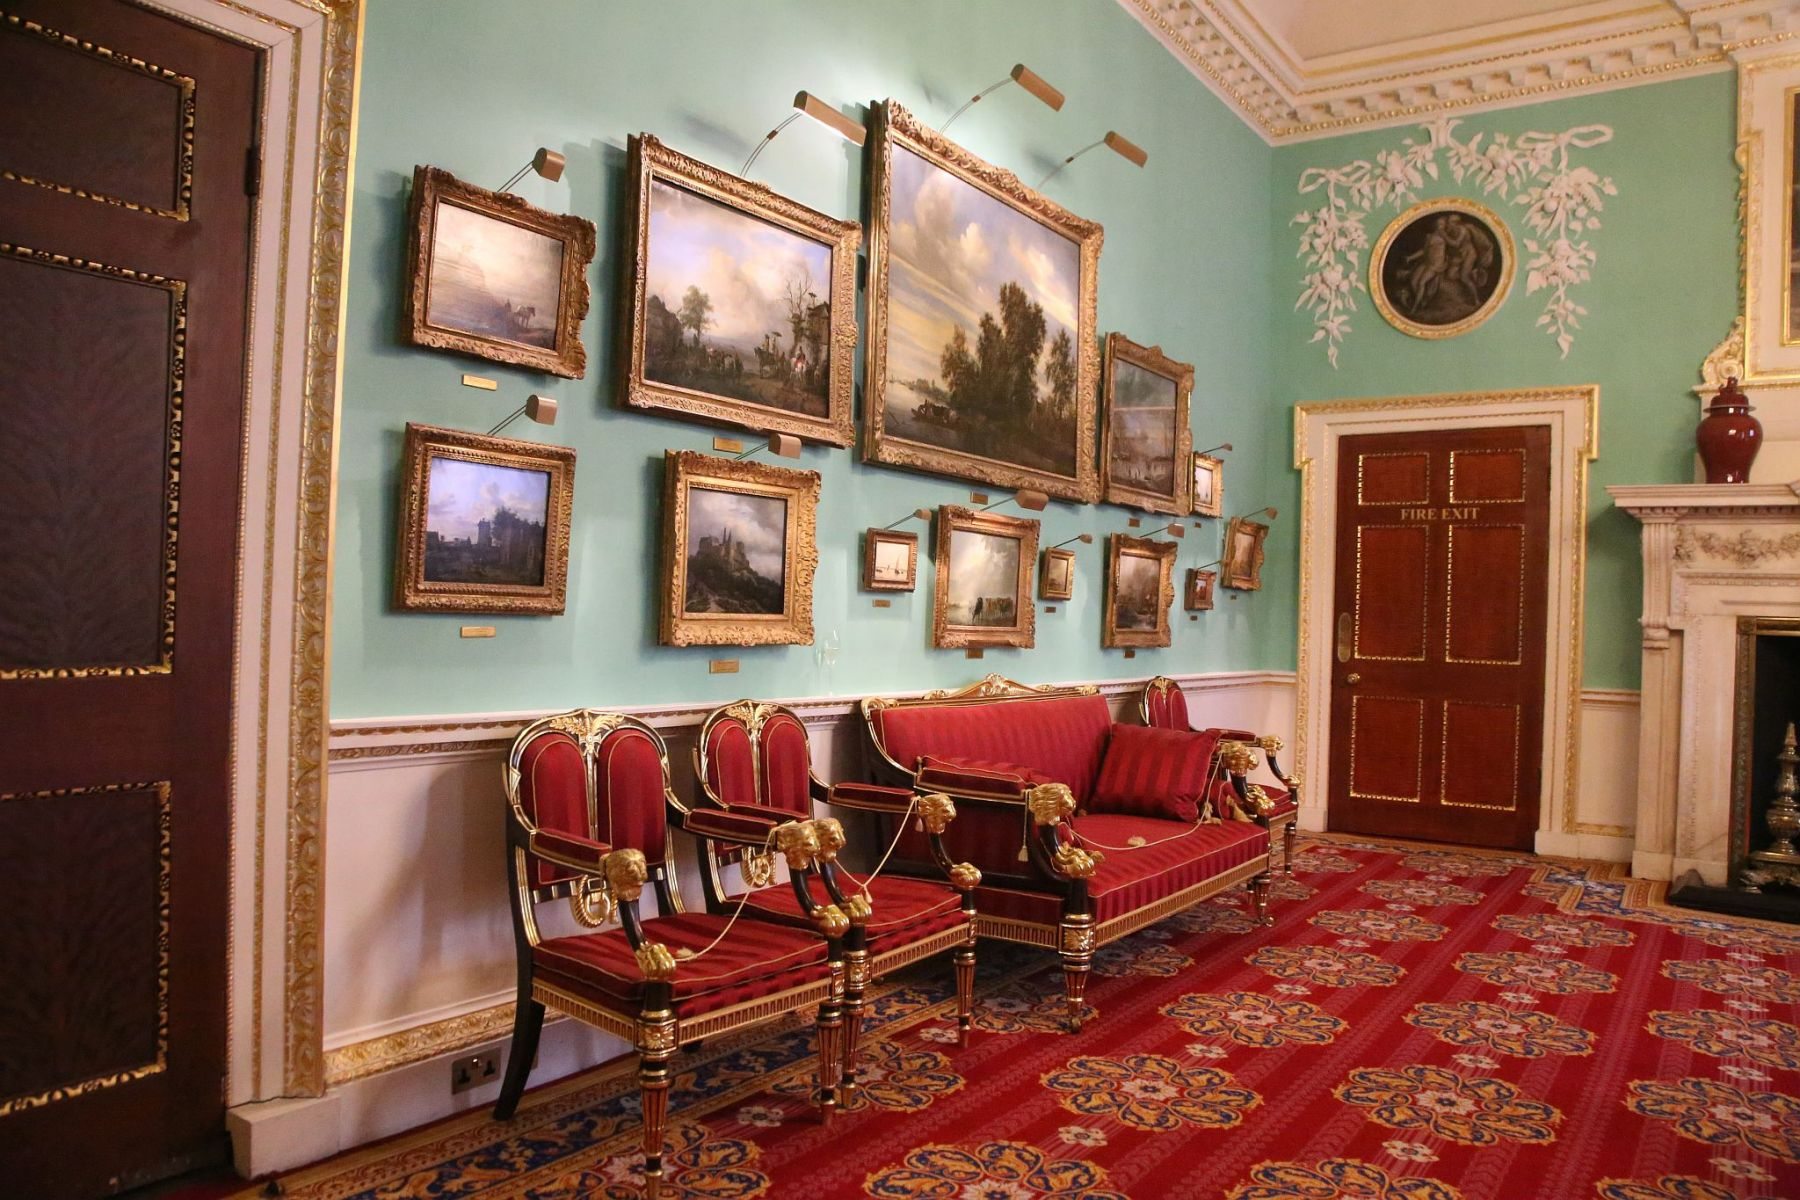 Paintings at The Mansion House, home to the Lord Mayor of the City of London.